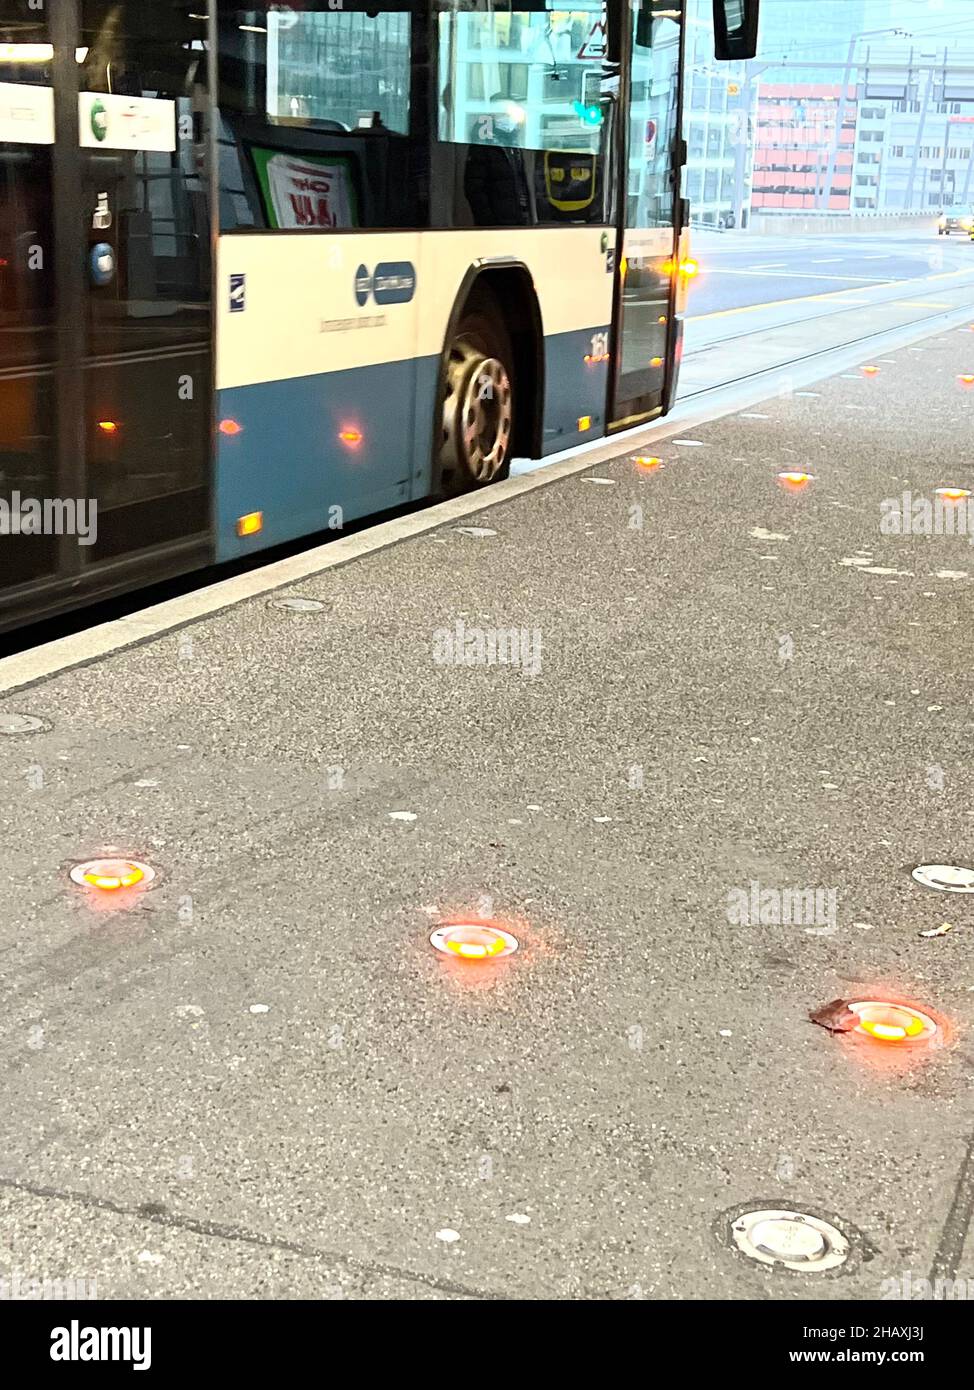 Public transportation bus at bus stop. There are red lights on the ground preventing the bicycles to ride on the sidewalk when there is a bus. Stock Photo